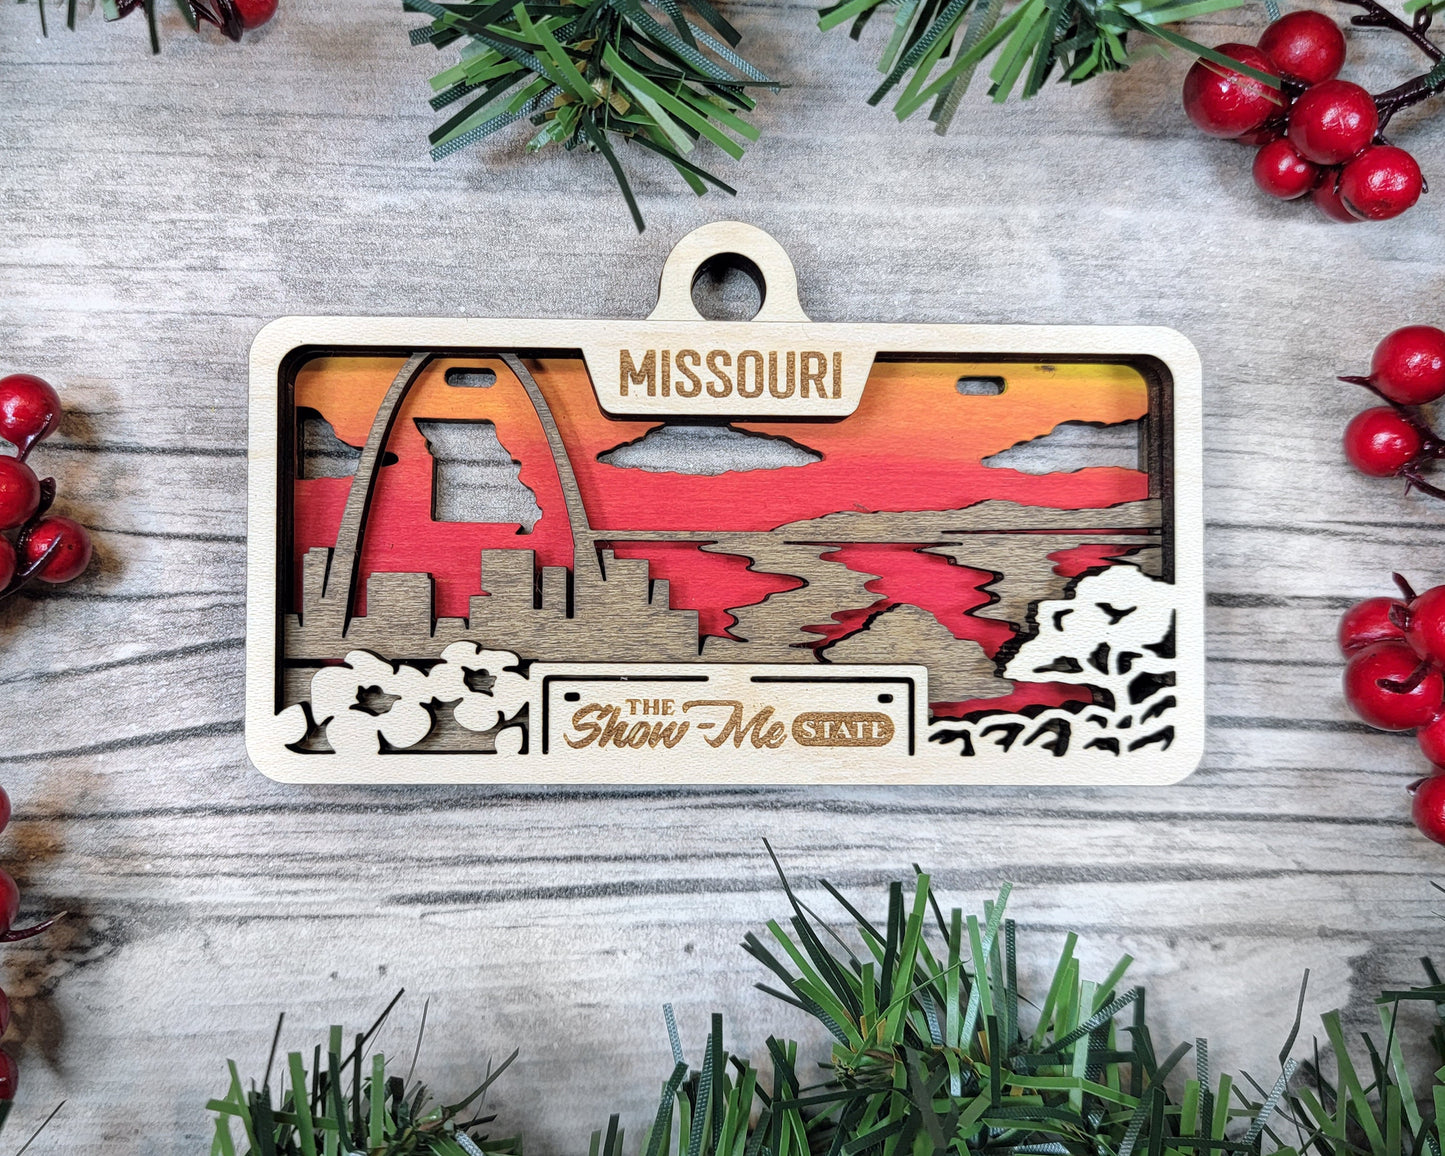 Missouri State Plate Ornament and Signage - SVG File Download - Sized for Glowforge - Laser Ready Digital Files